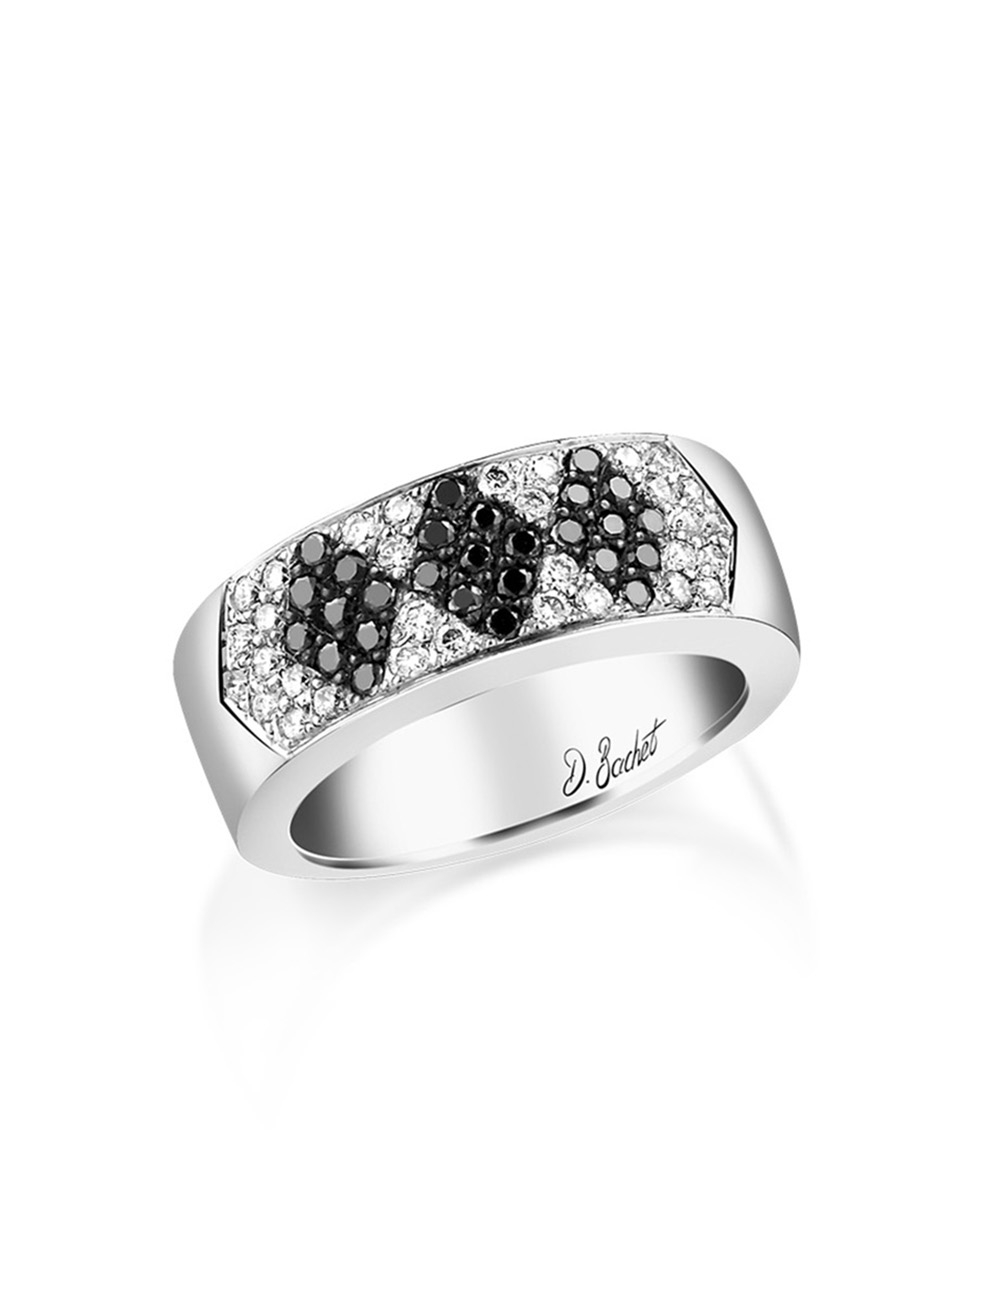 Women's luxury and unique wedding ring in white and black diamonds to wear alone